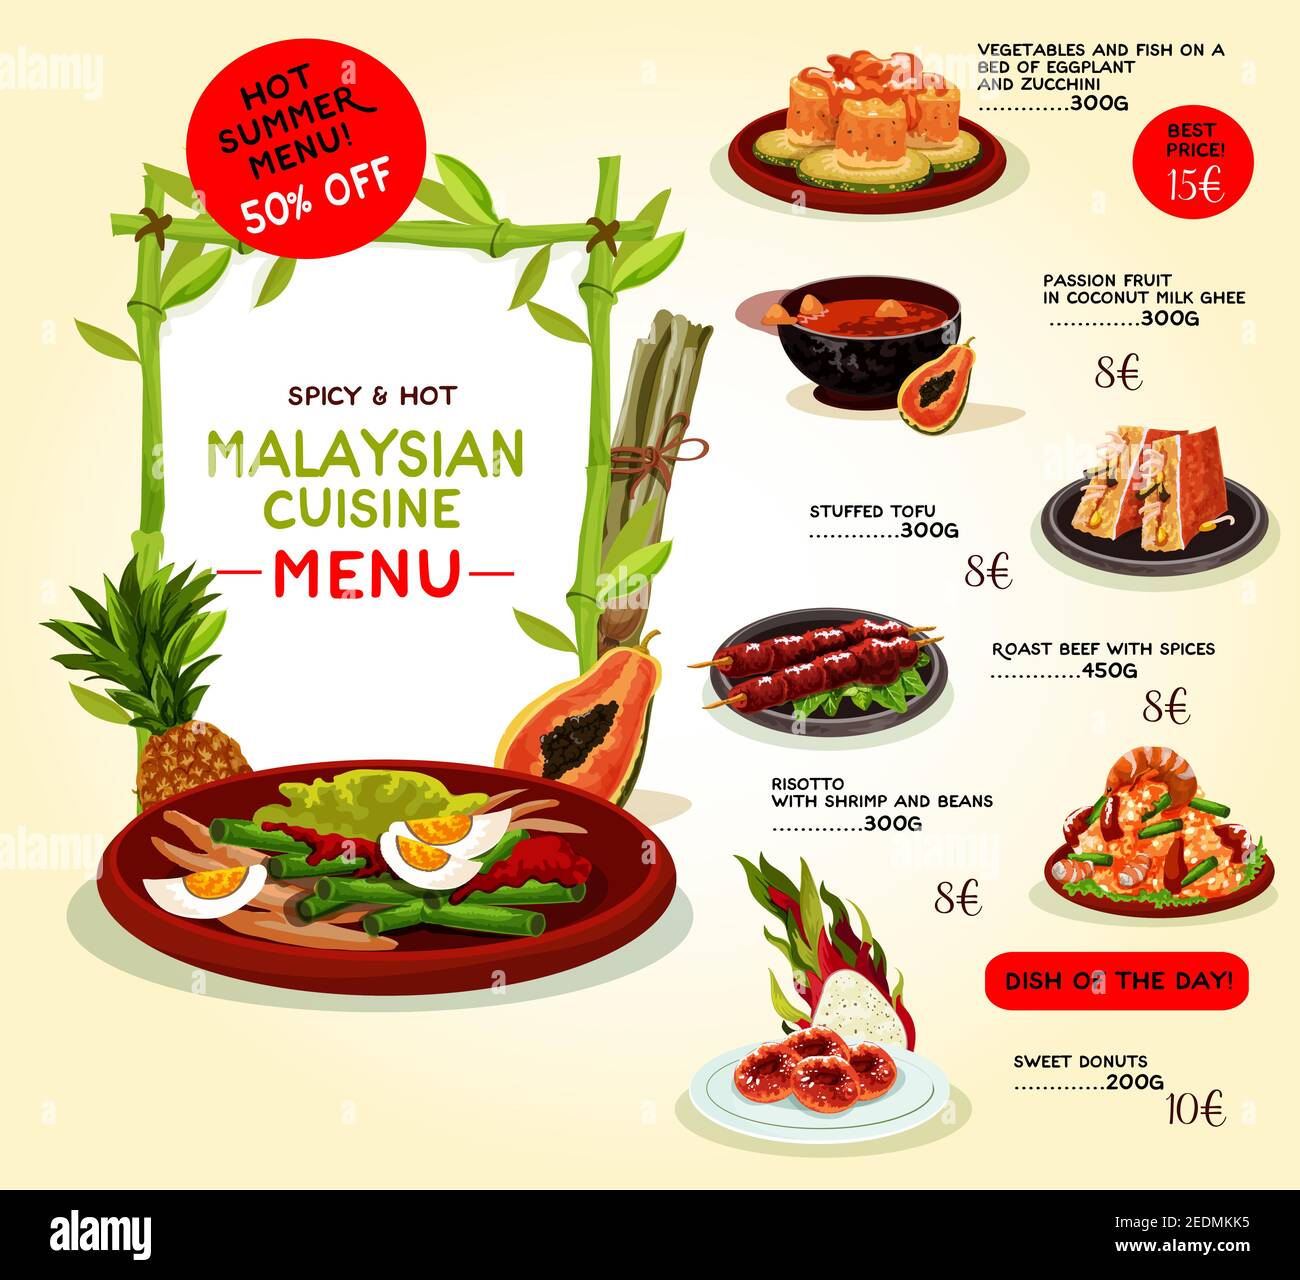 Malaysian cuisine restaurant menu template. Asian food special offer with grilled beef, seafood risotto, baked fish with vegetables, tropical fruit de Stock Vector